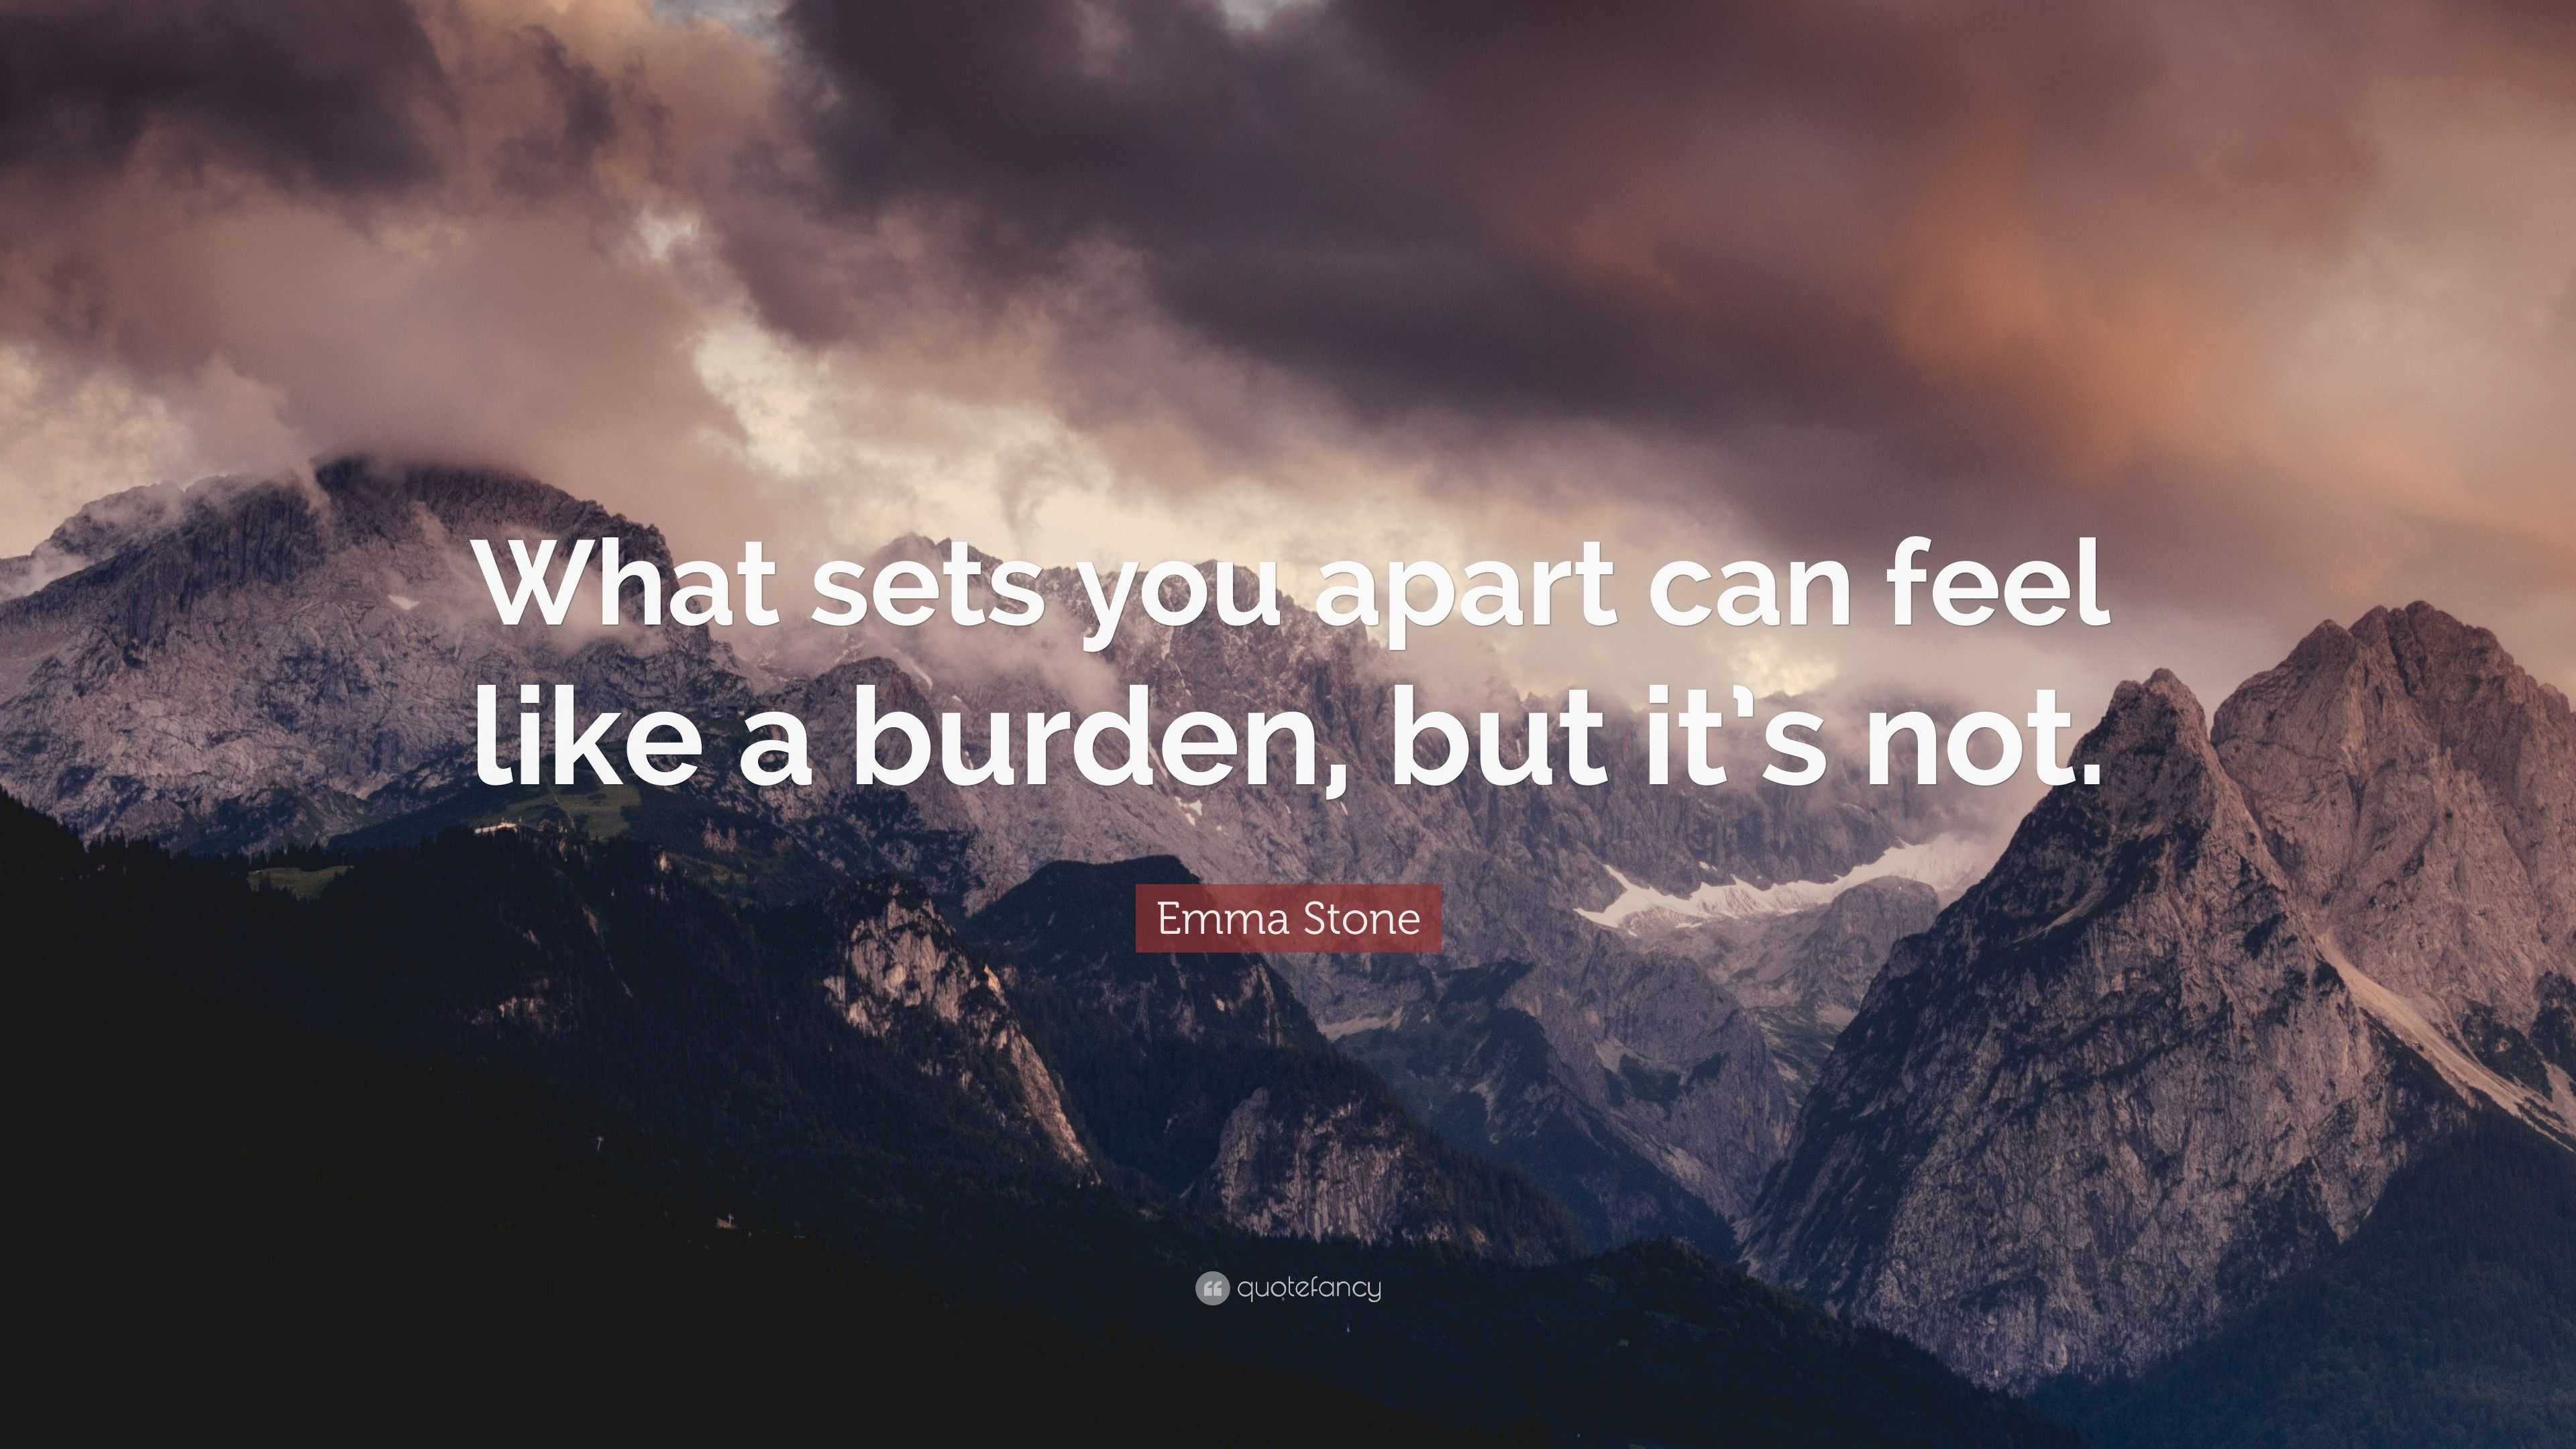 Emma Stone Quote: “What Sets You Apart Can Feel Like A Burden, But It's Not.”